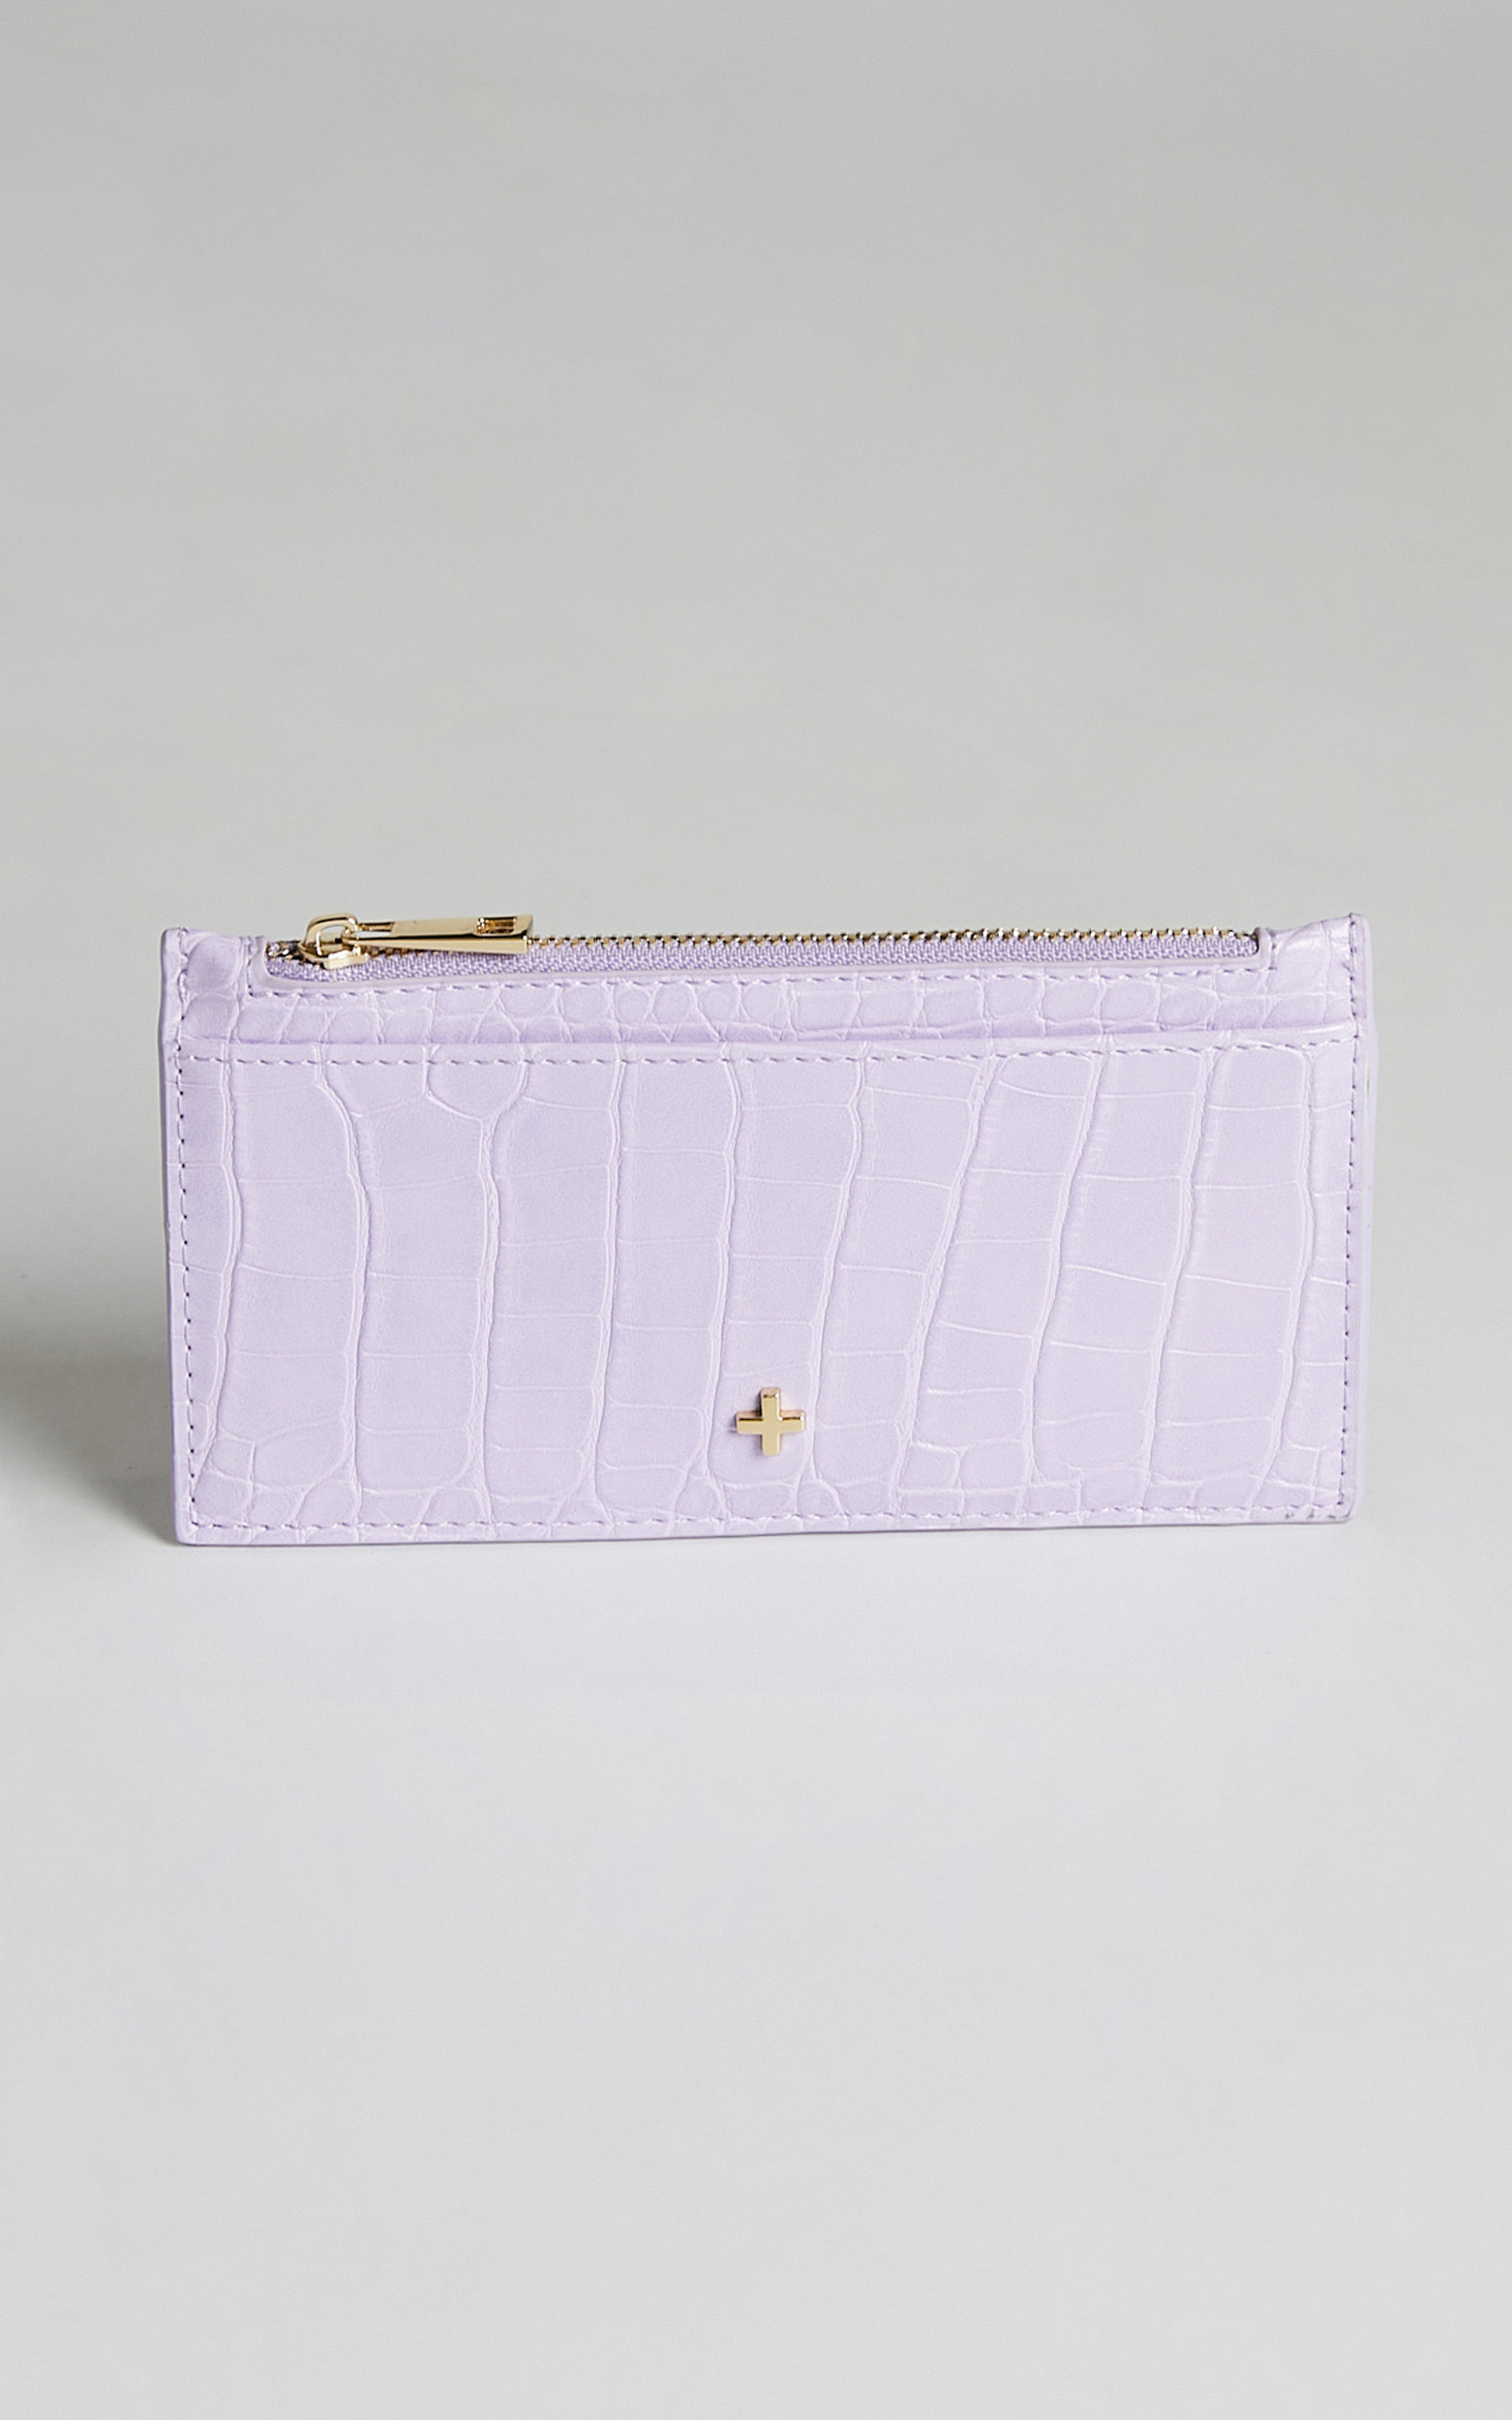 Peta And Jain - Marley Wallet in Lilac Croc - NoSize, PRP1, hi-res image number null